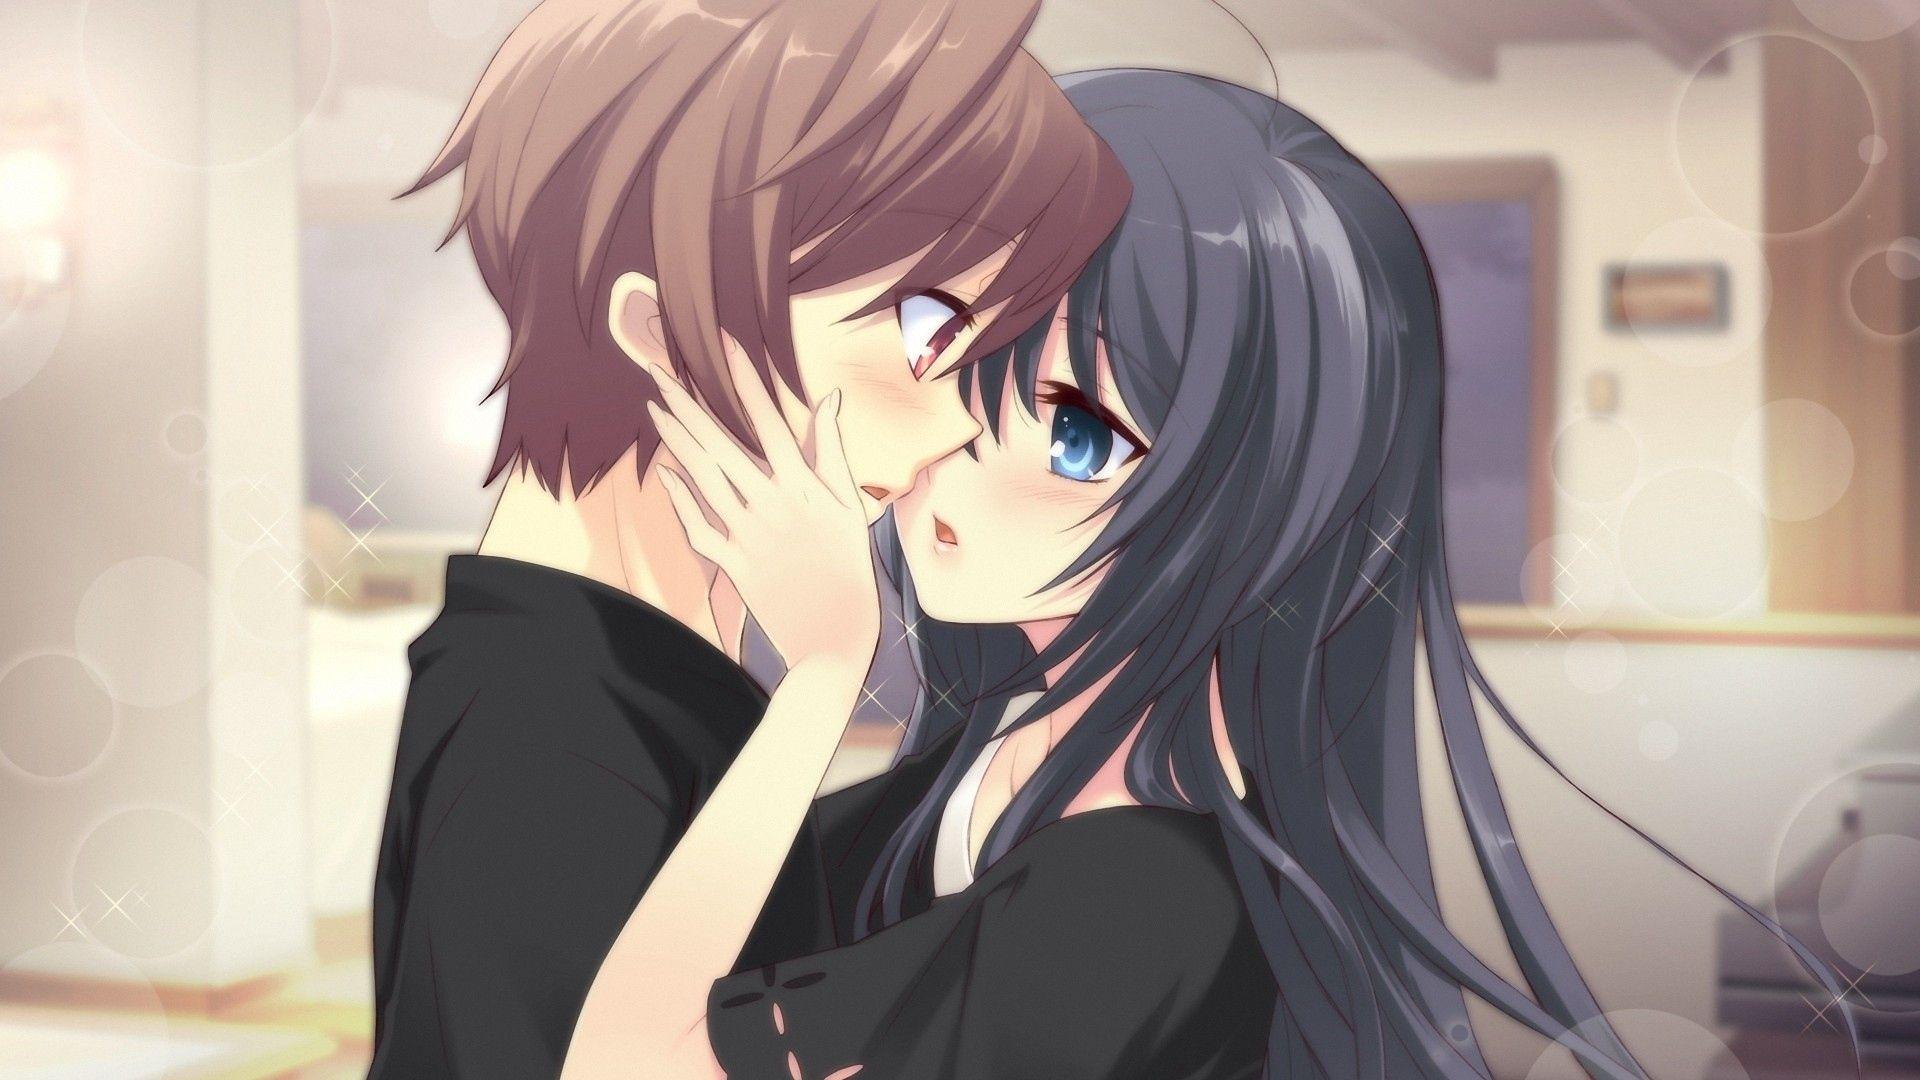 Free Wallpaper: Anime Couple Wallpaper HD For iPhone